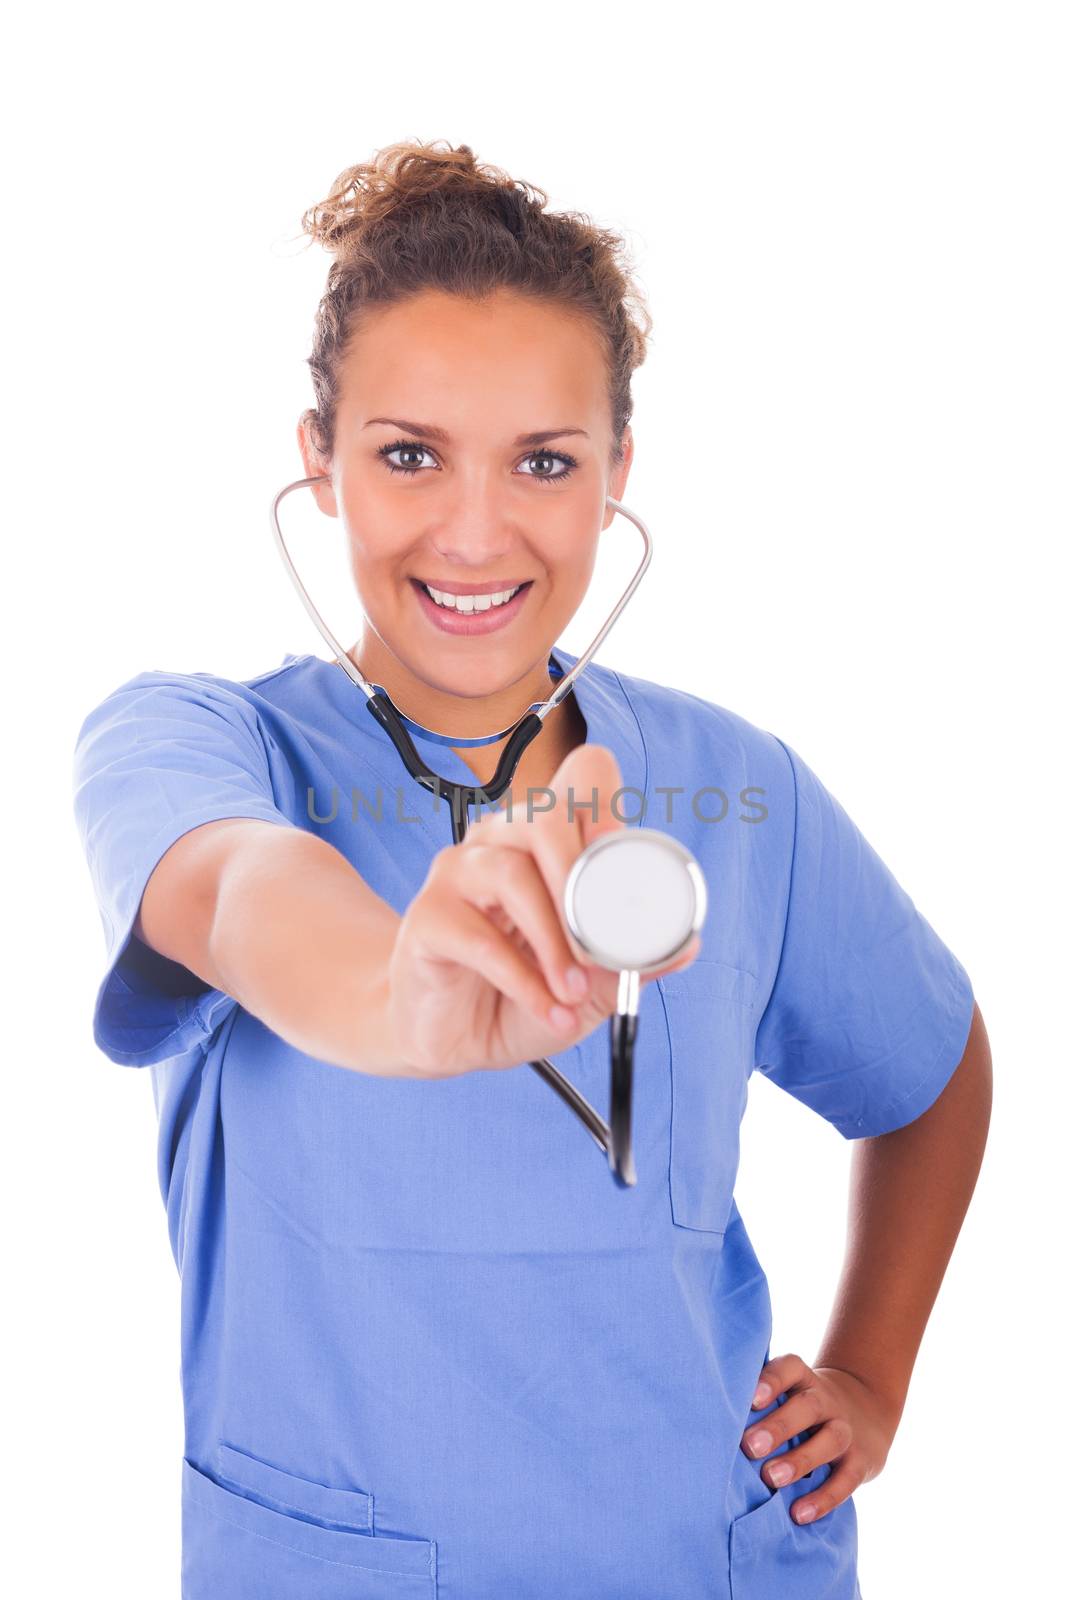 Young doctor with stethoscope isolated on white background by michel74100